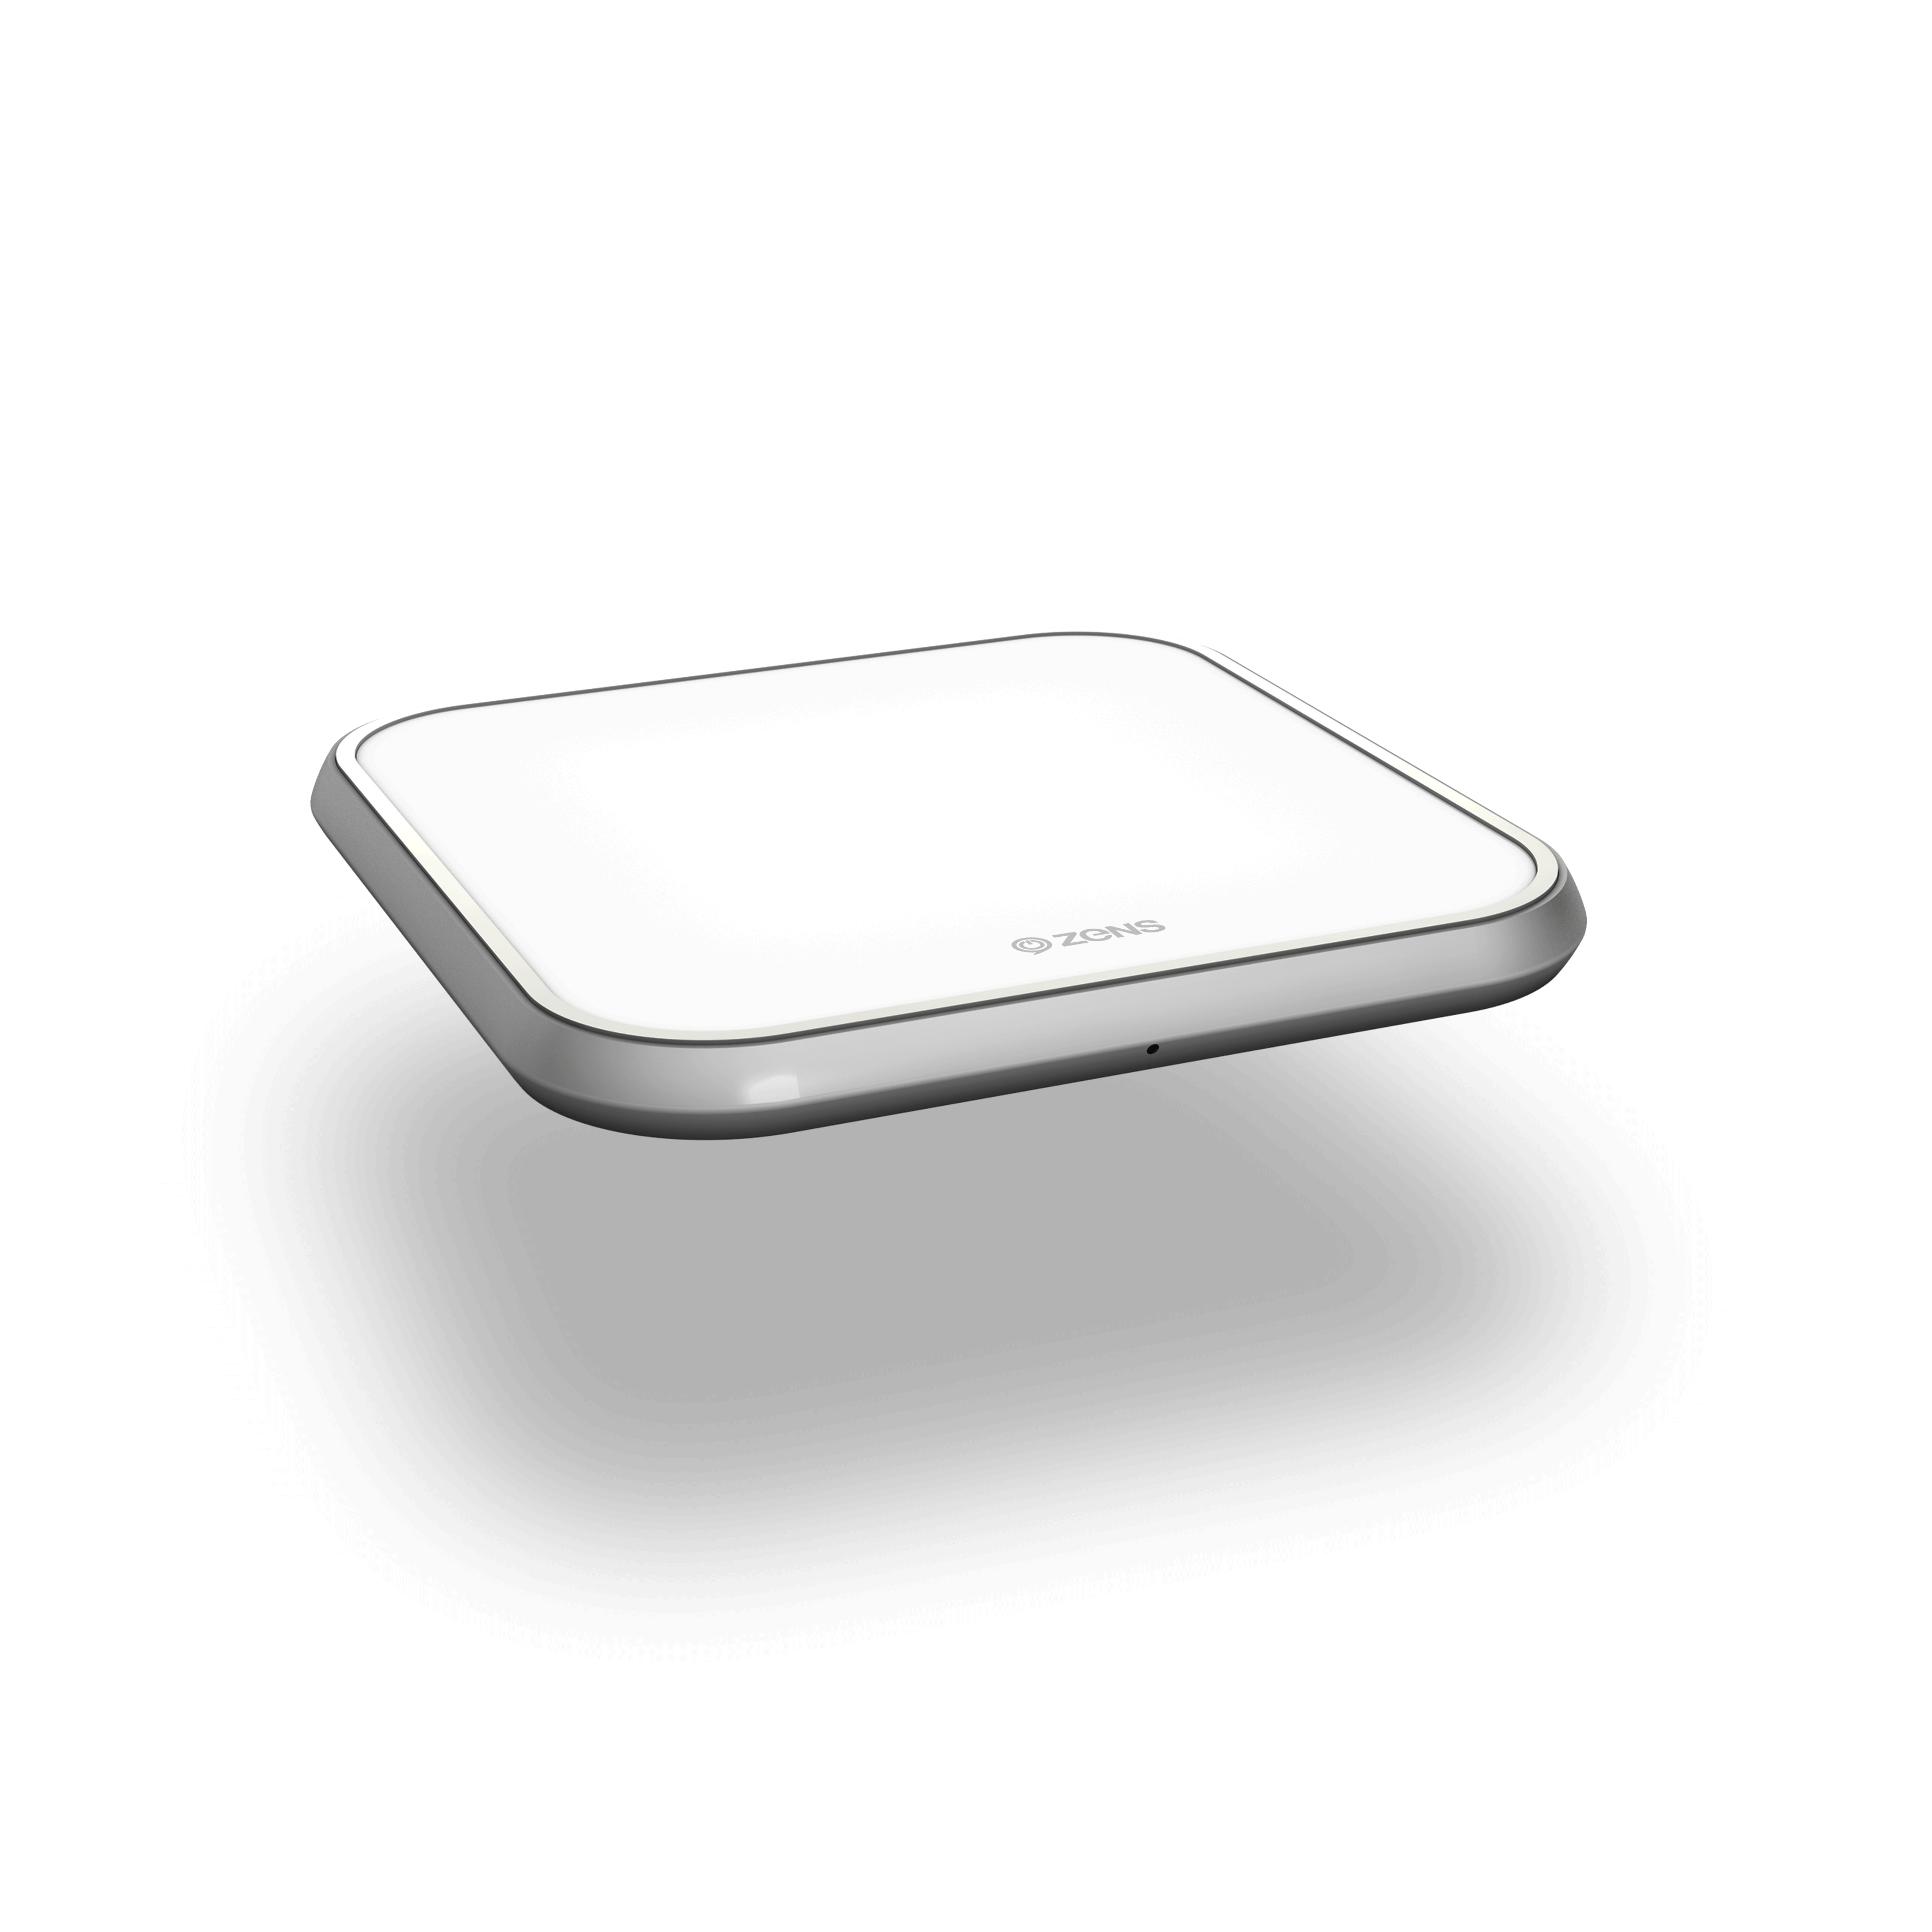 Single Aluminium Wireless Charger side view